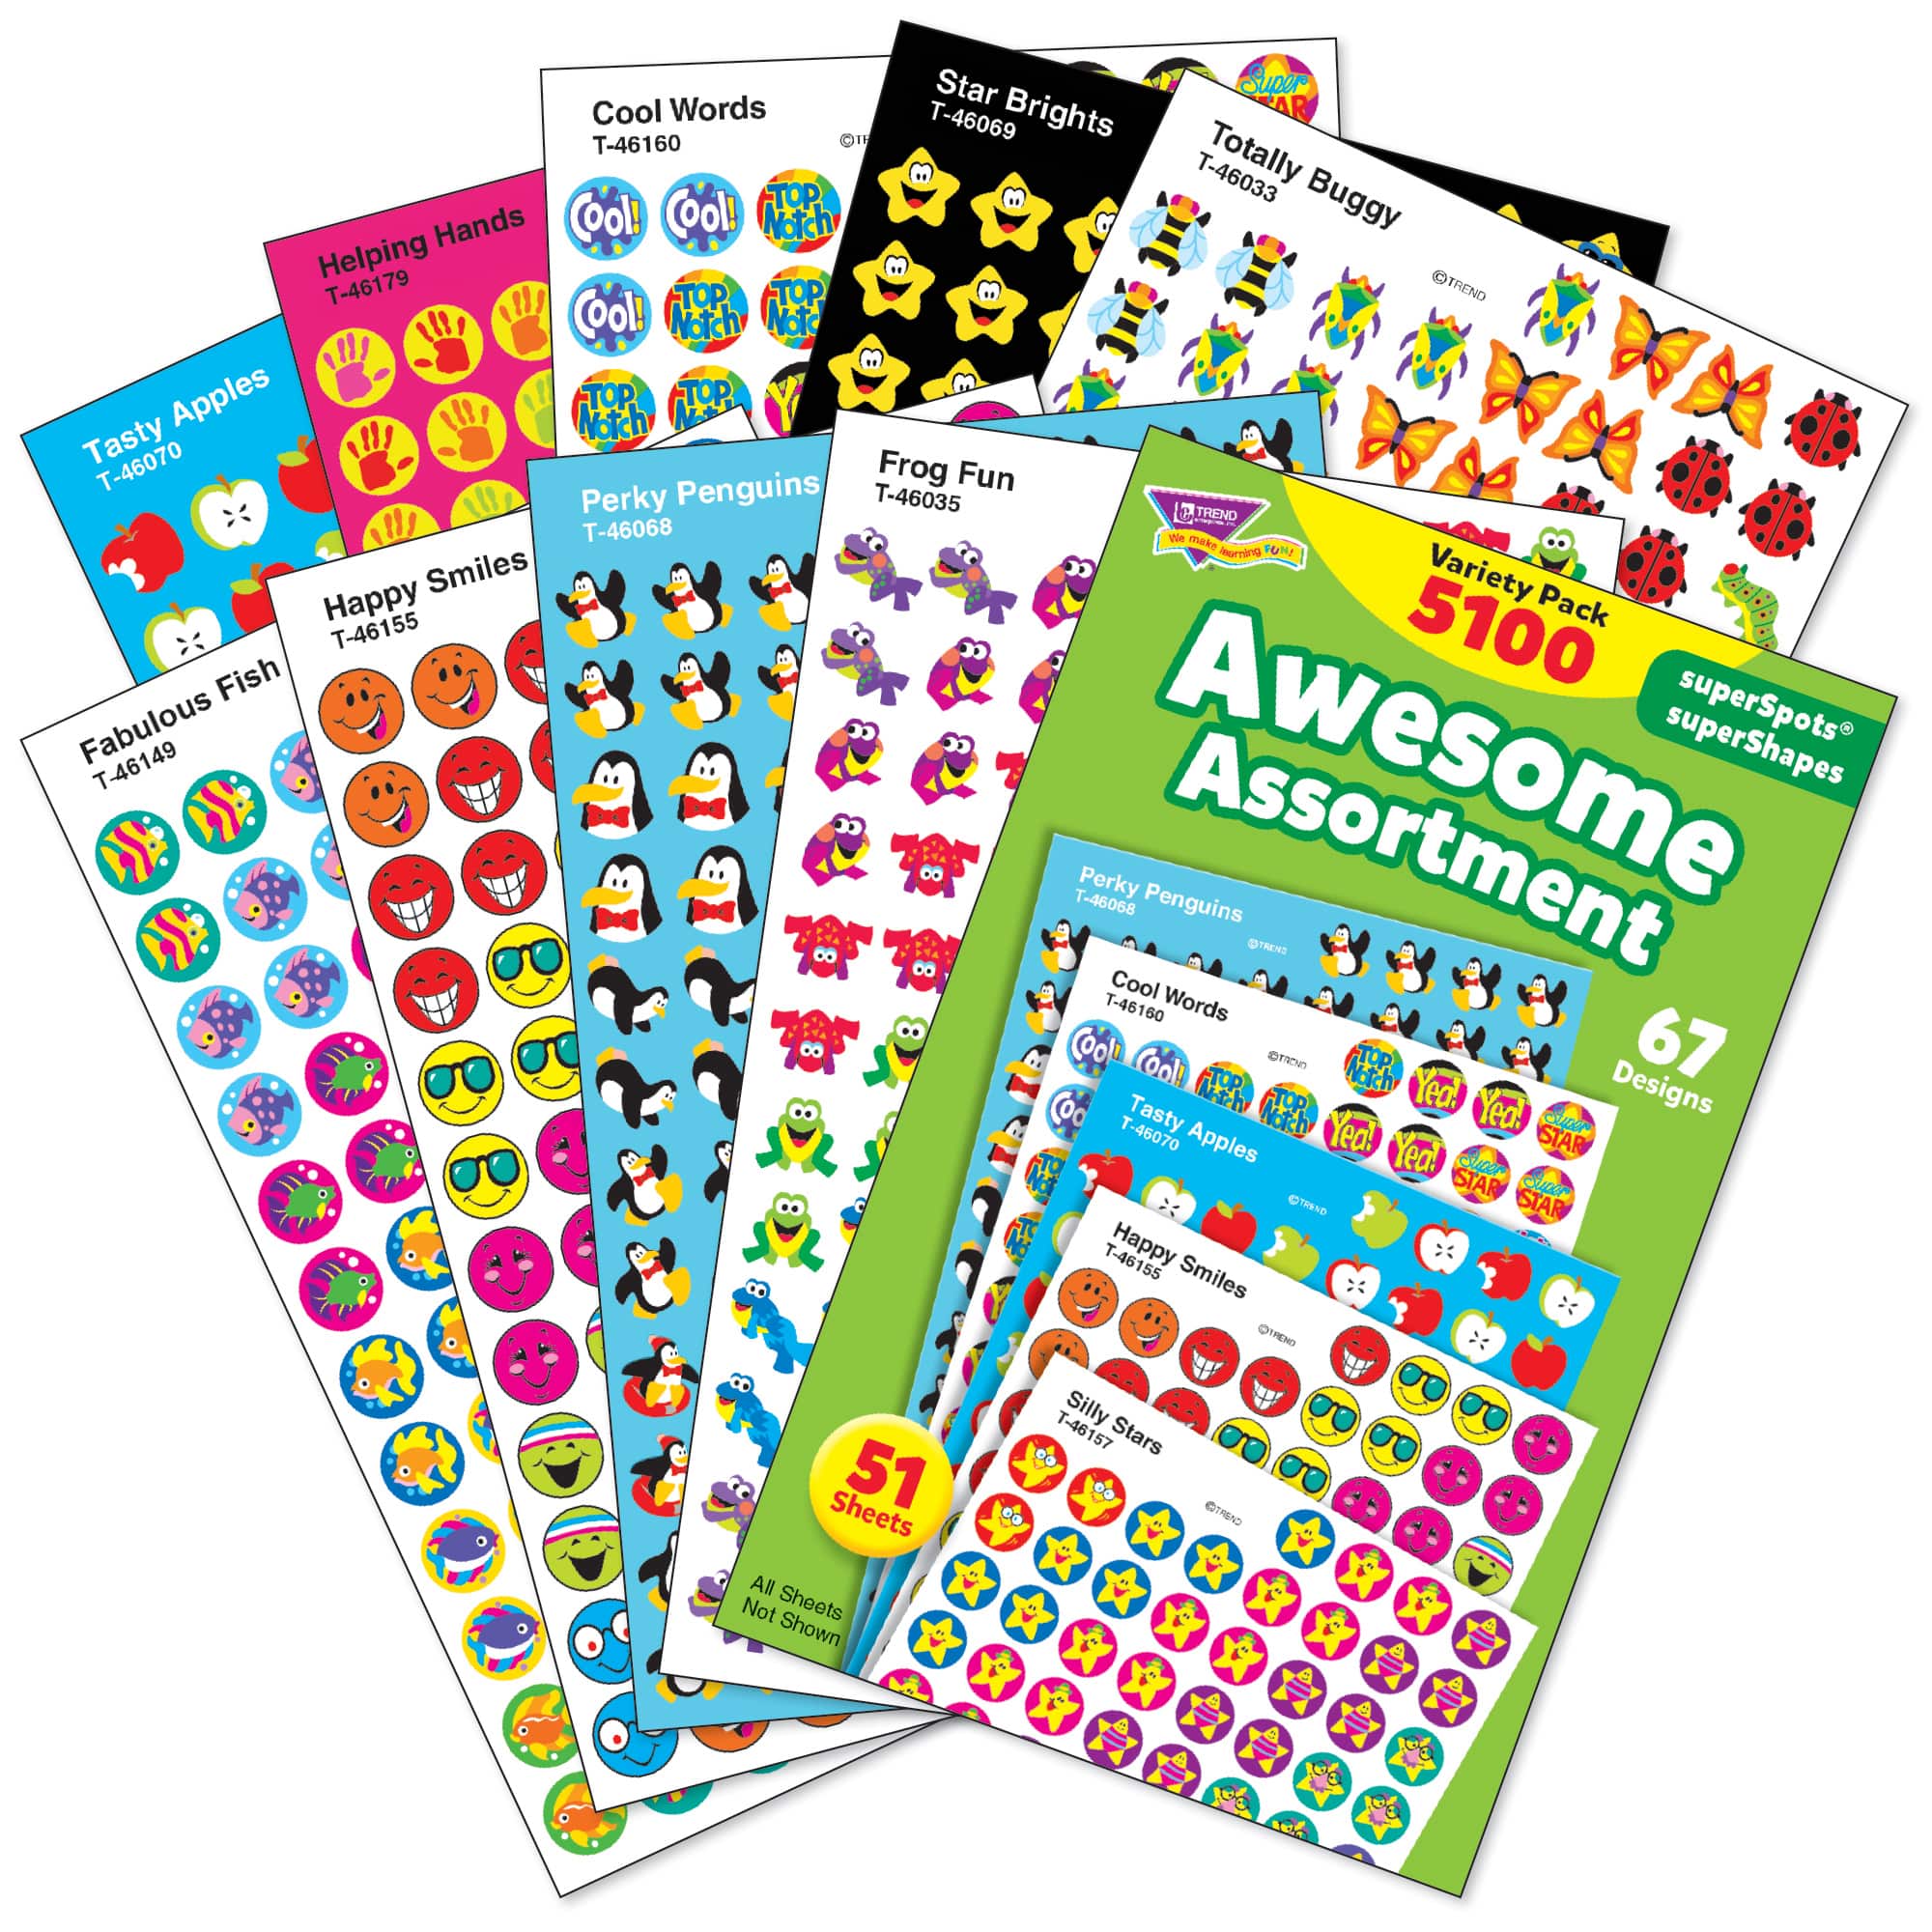 Trend Enterprises&#xAE; superSpots&#xAE; superShapes Awesome Assortment 7/16&#x201D; Stickers, 5100 Count